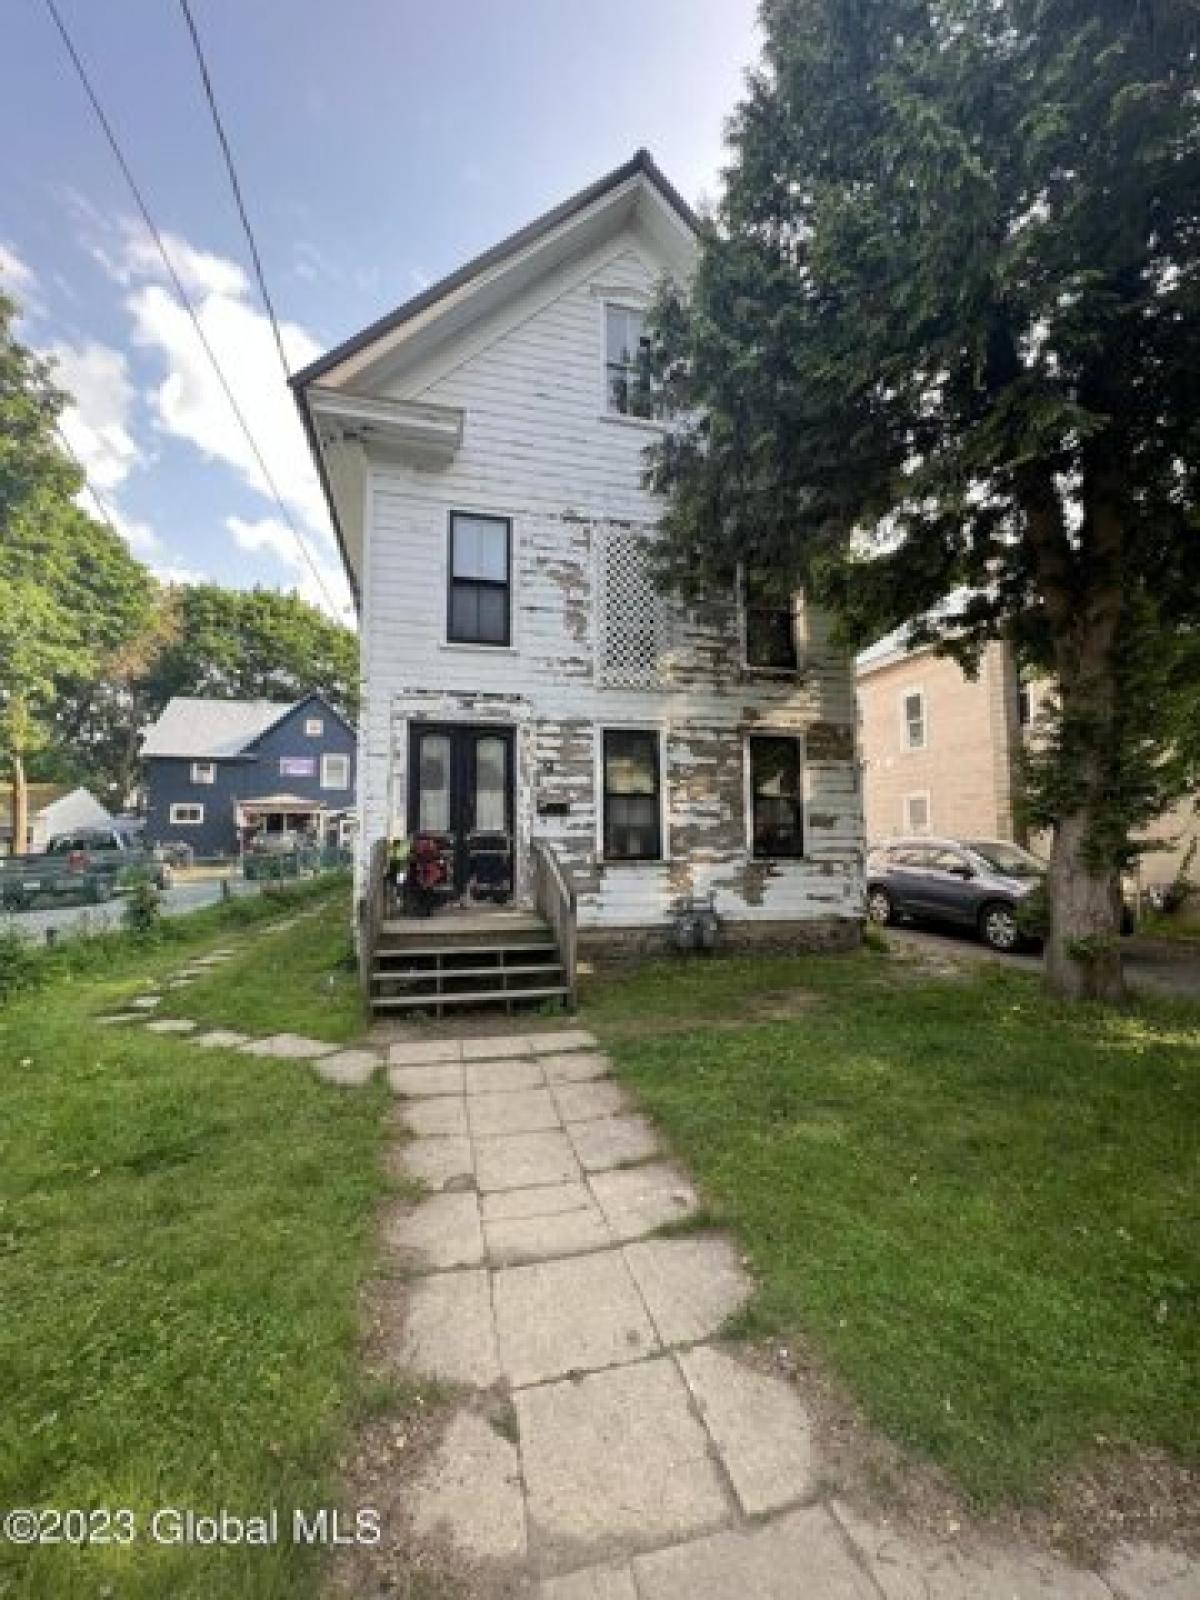 Picture of Home For Sale in Gloversville, New York, United States